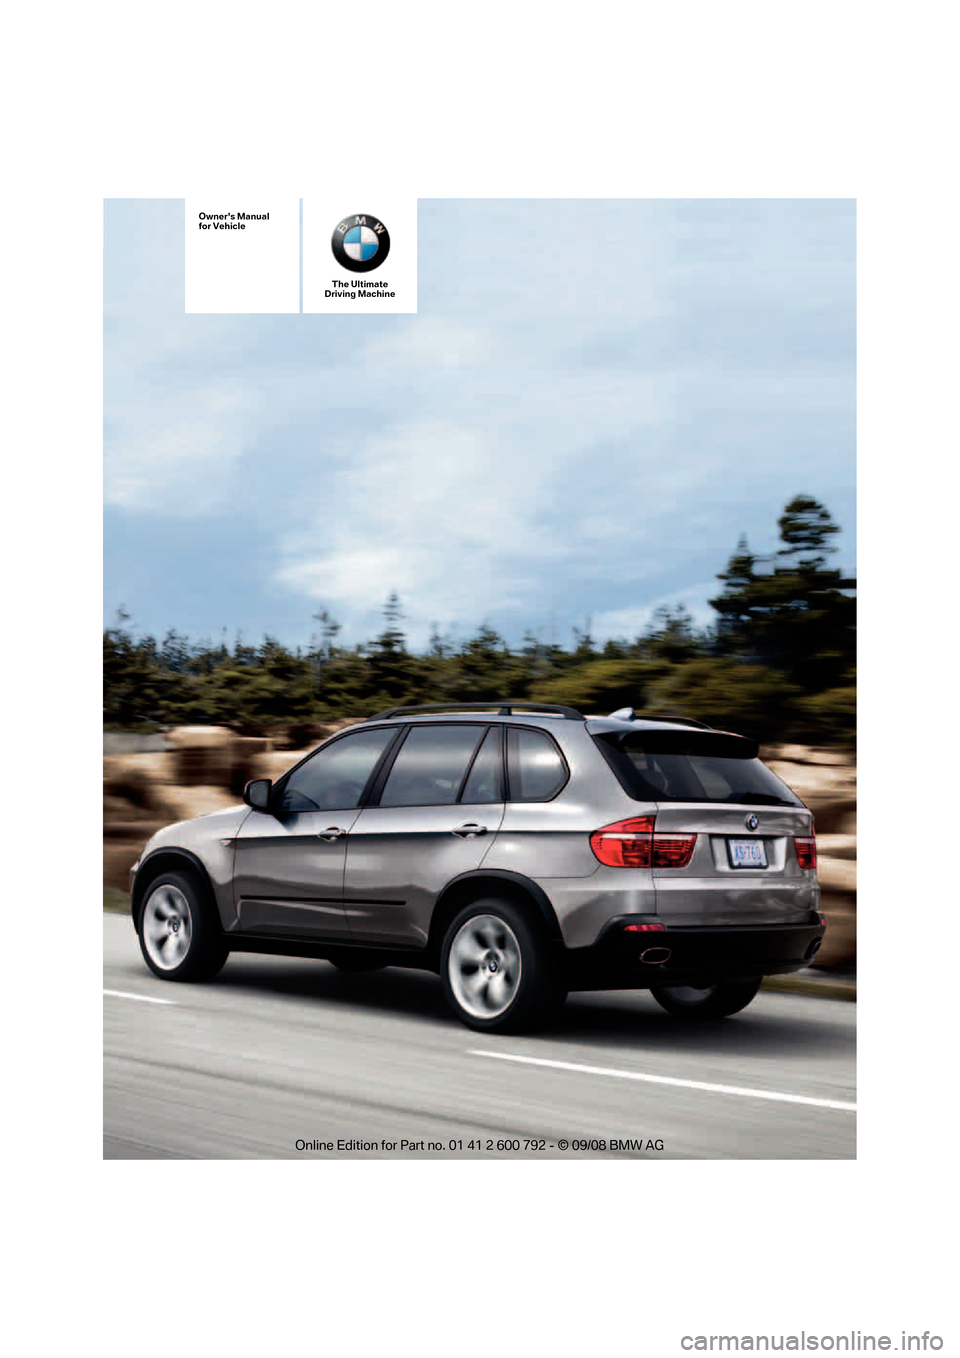 BMW X5 XDRIVE 30I 2009 E70 Owners Manual The Ultimate
Driving Machine
Owners Manual
for Vehicle 